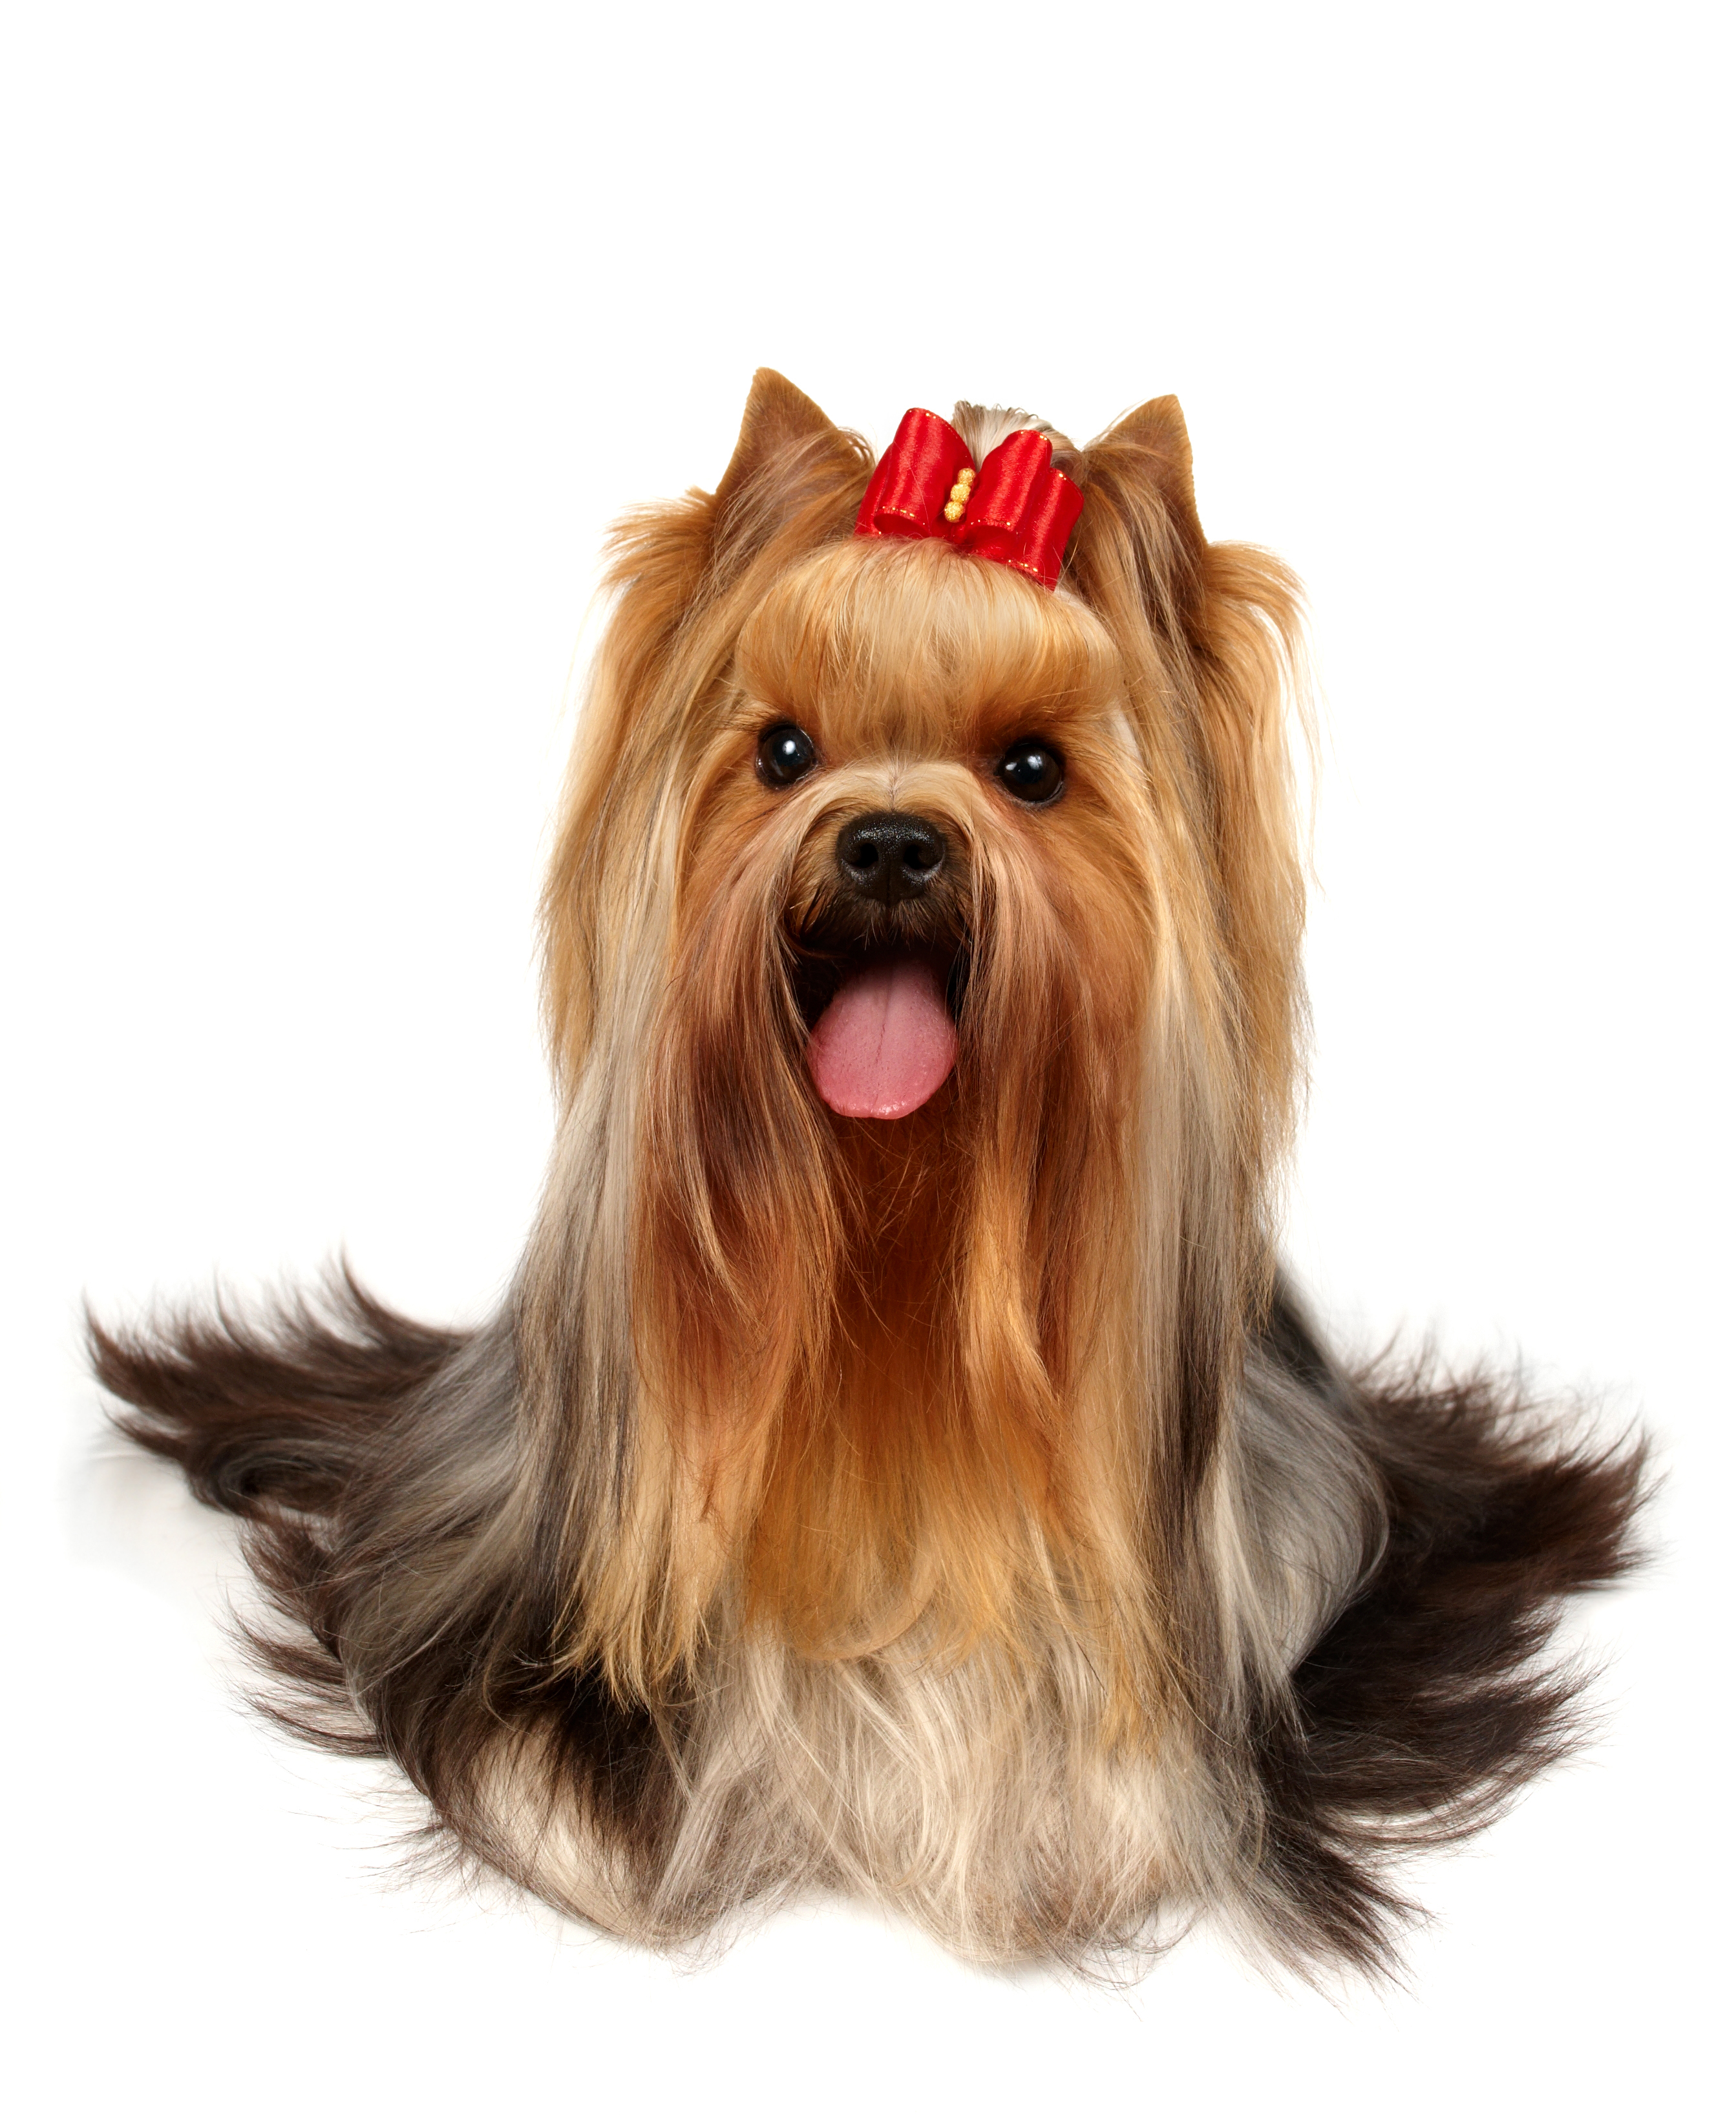 Types of Yorkie Hair Cuts